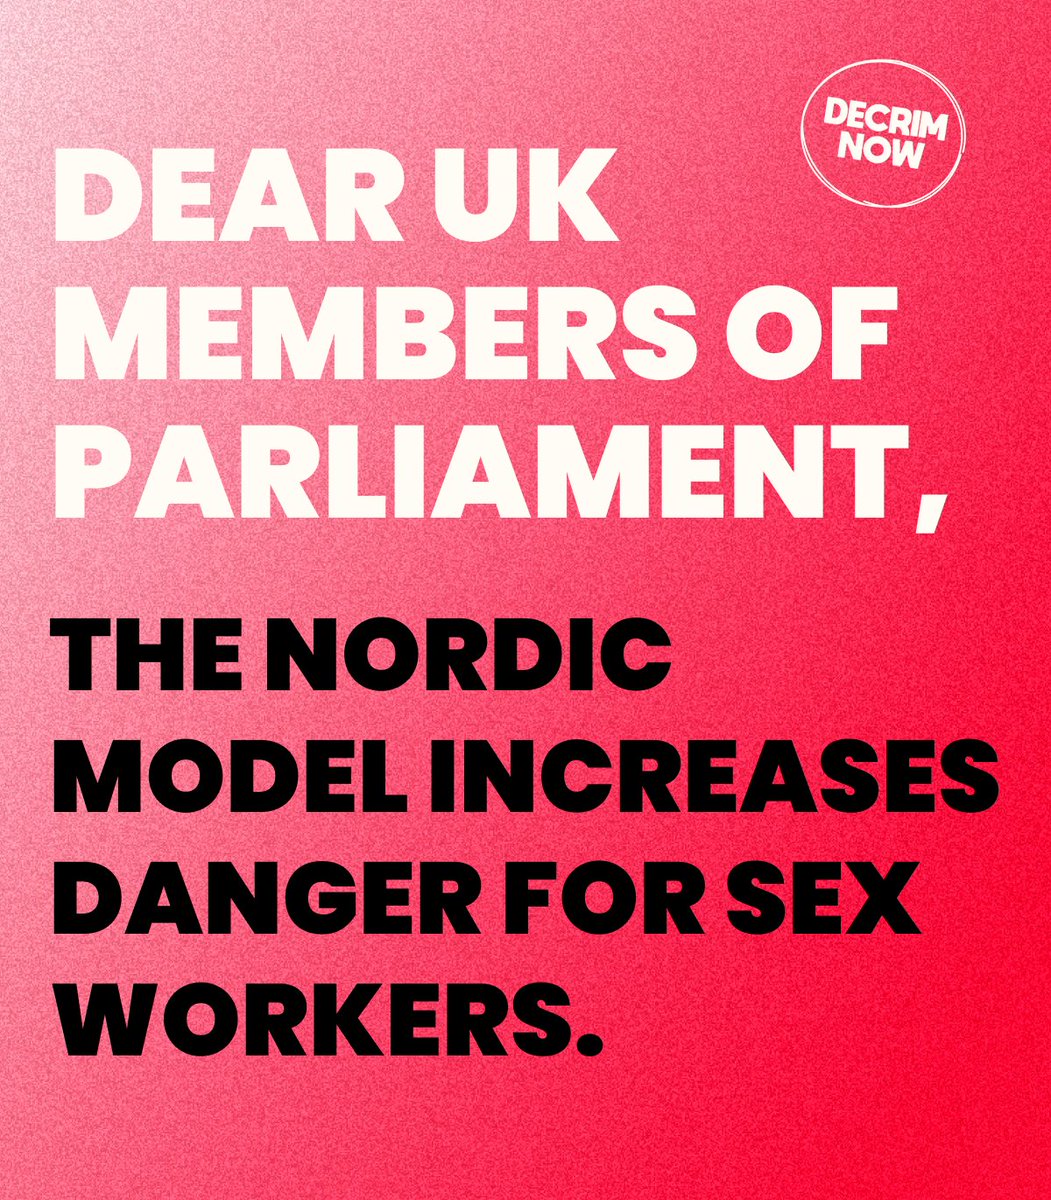  @UVWunion signed our open letter against the Nordic Model UVW is a members-led, campaigning trade union of migrant & precarious workers. Read the letter here  https://decrimnow.org.uk/open-letter-on-the-nordic-model/  #notonordicmodel